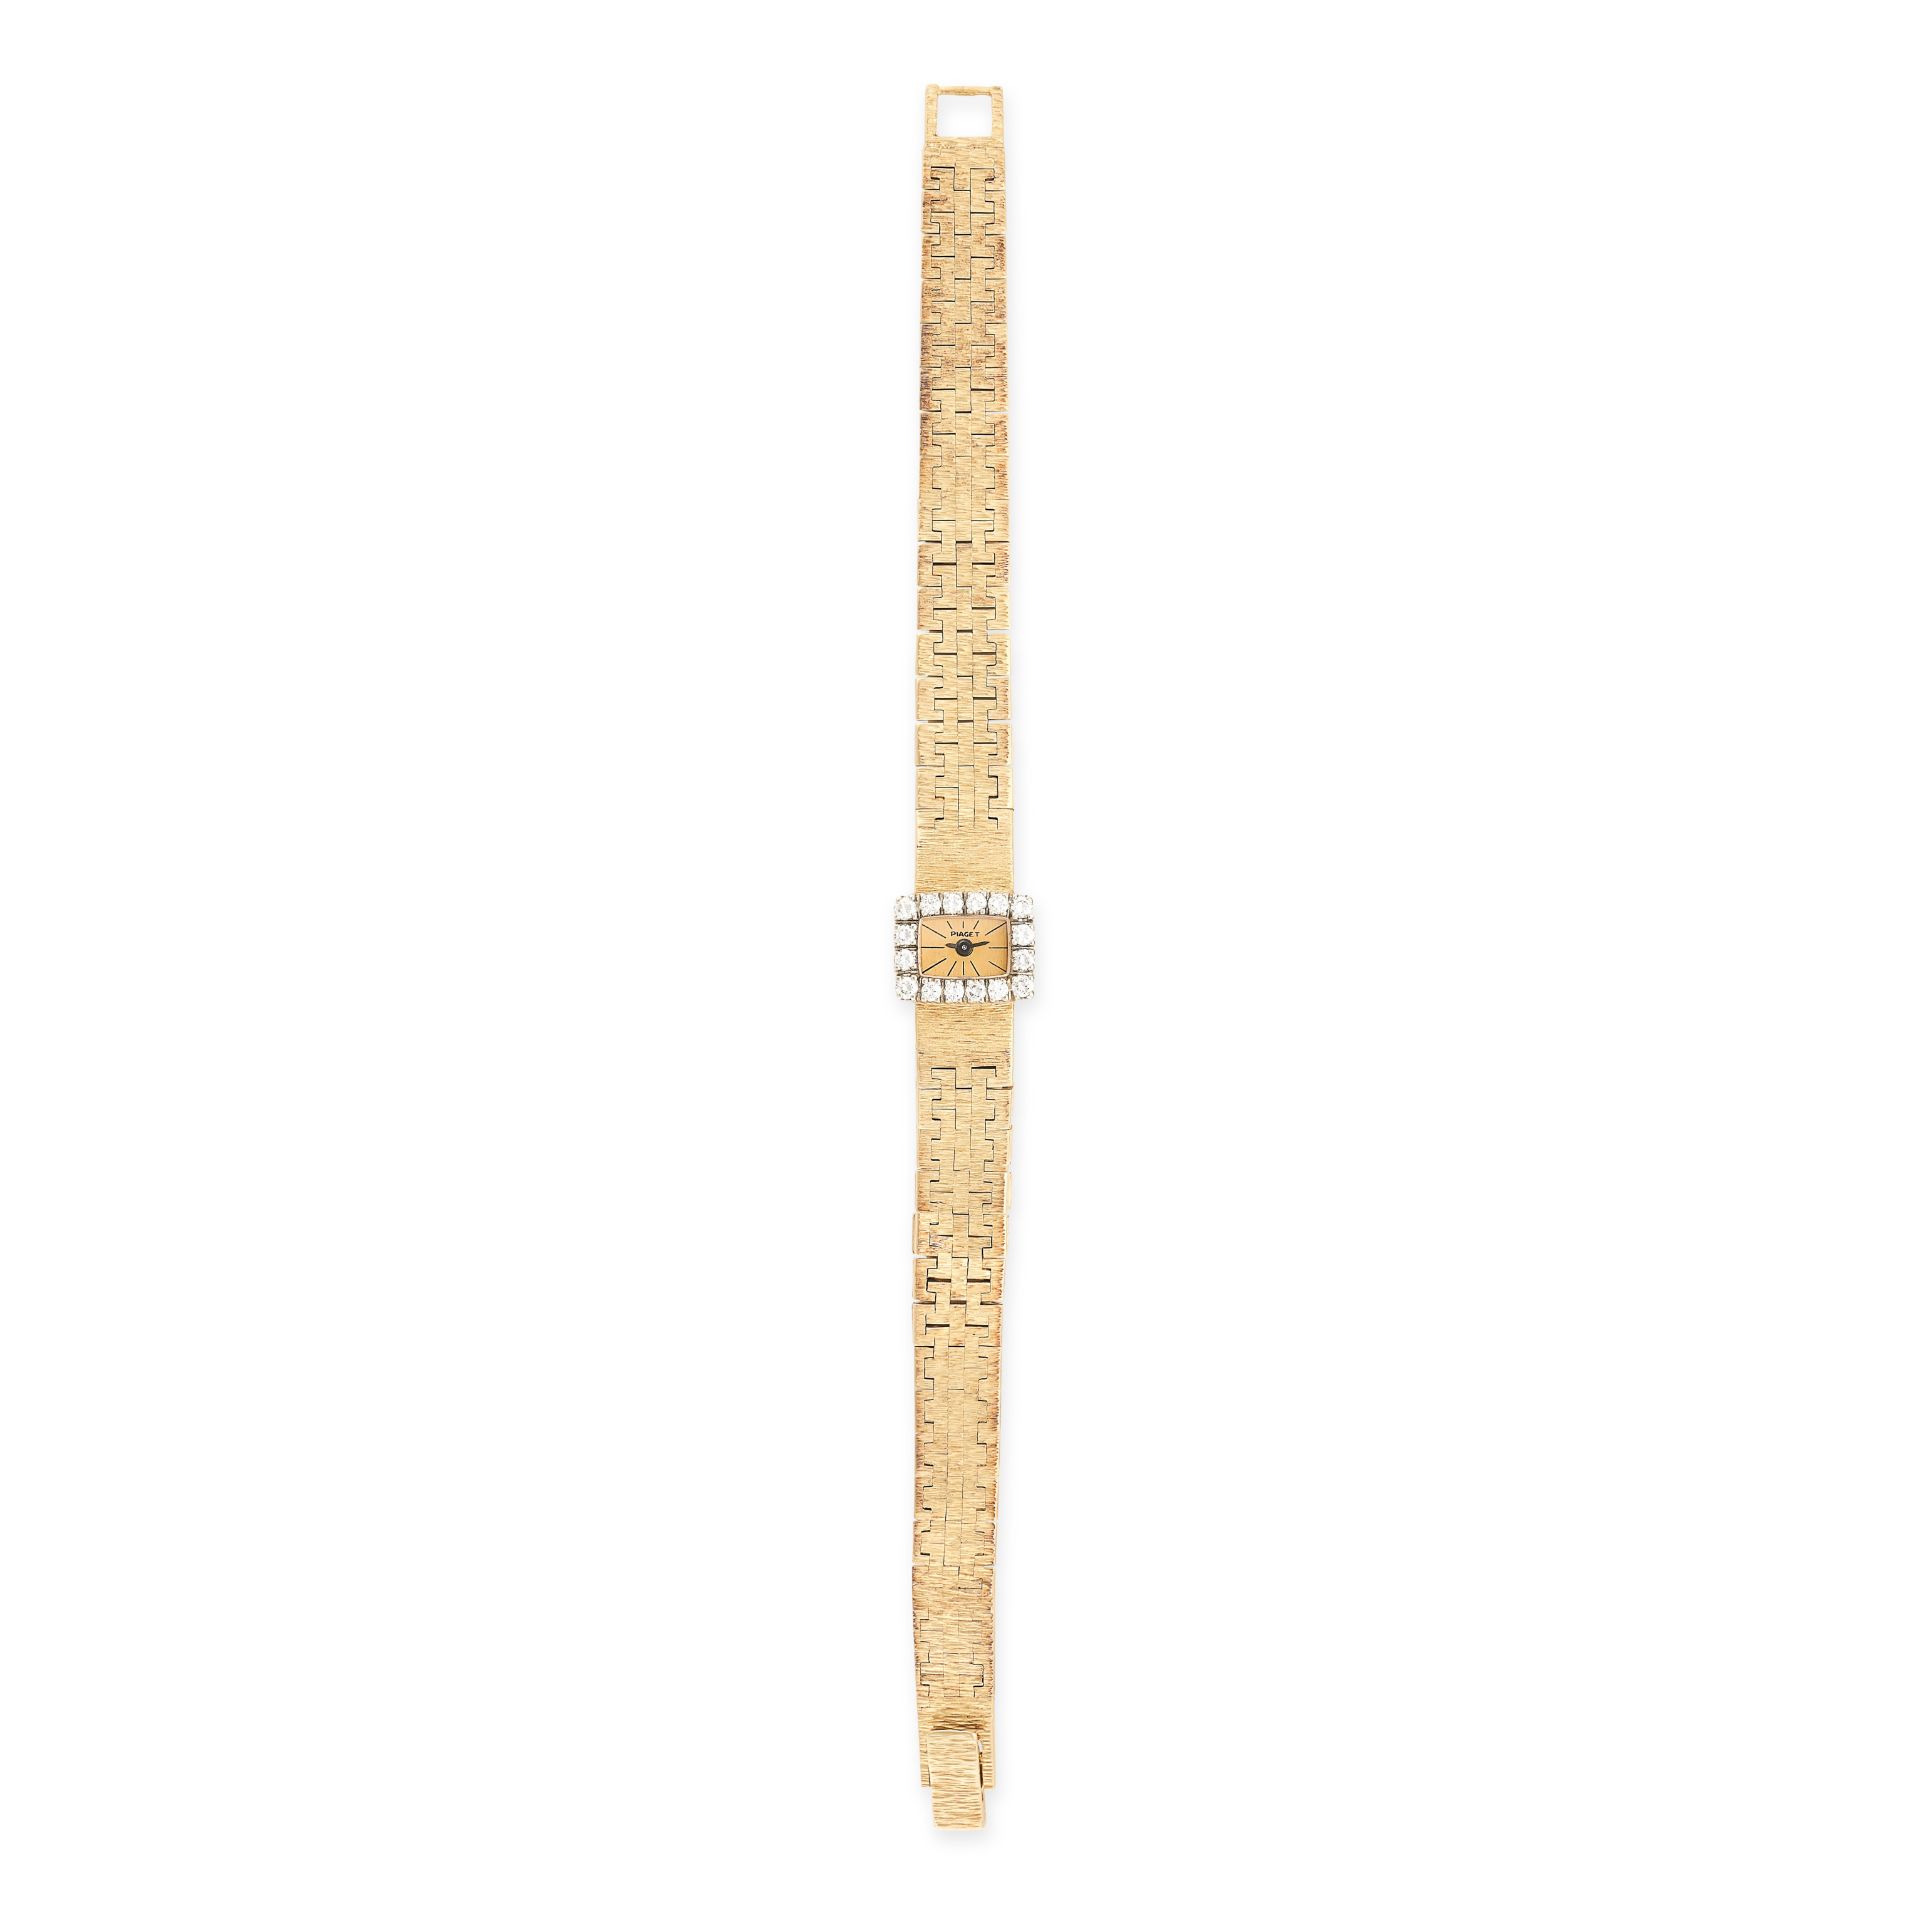 PIAGET, A VINTAGE LADIES COCKTAIL WATCH in yellow gold, model reference 1304A6, 12x10mm square